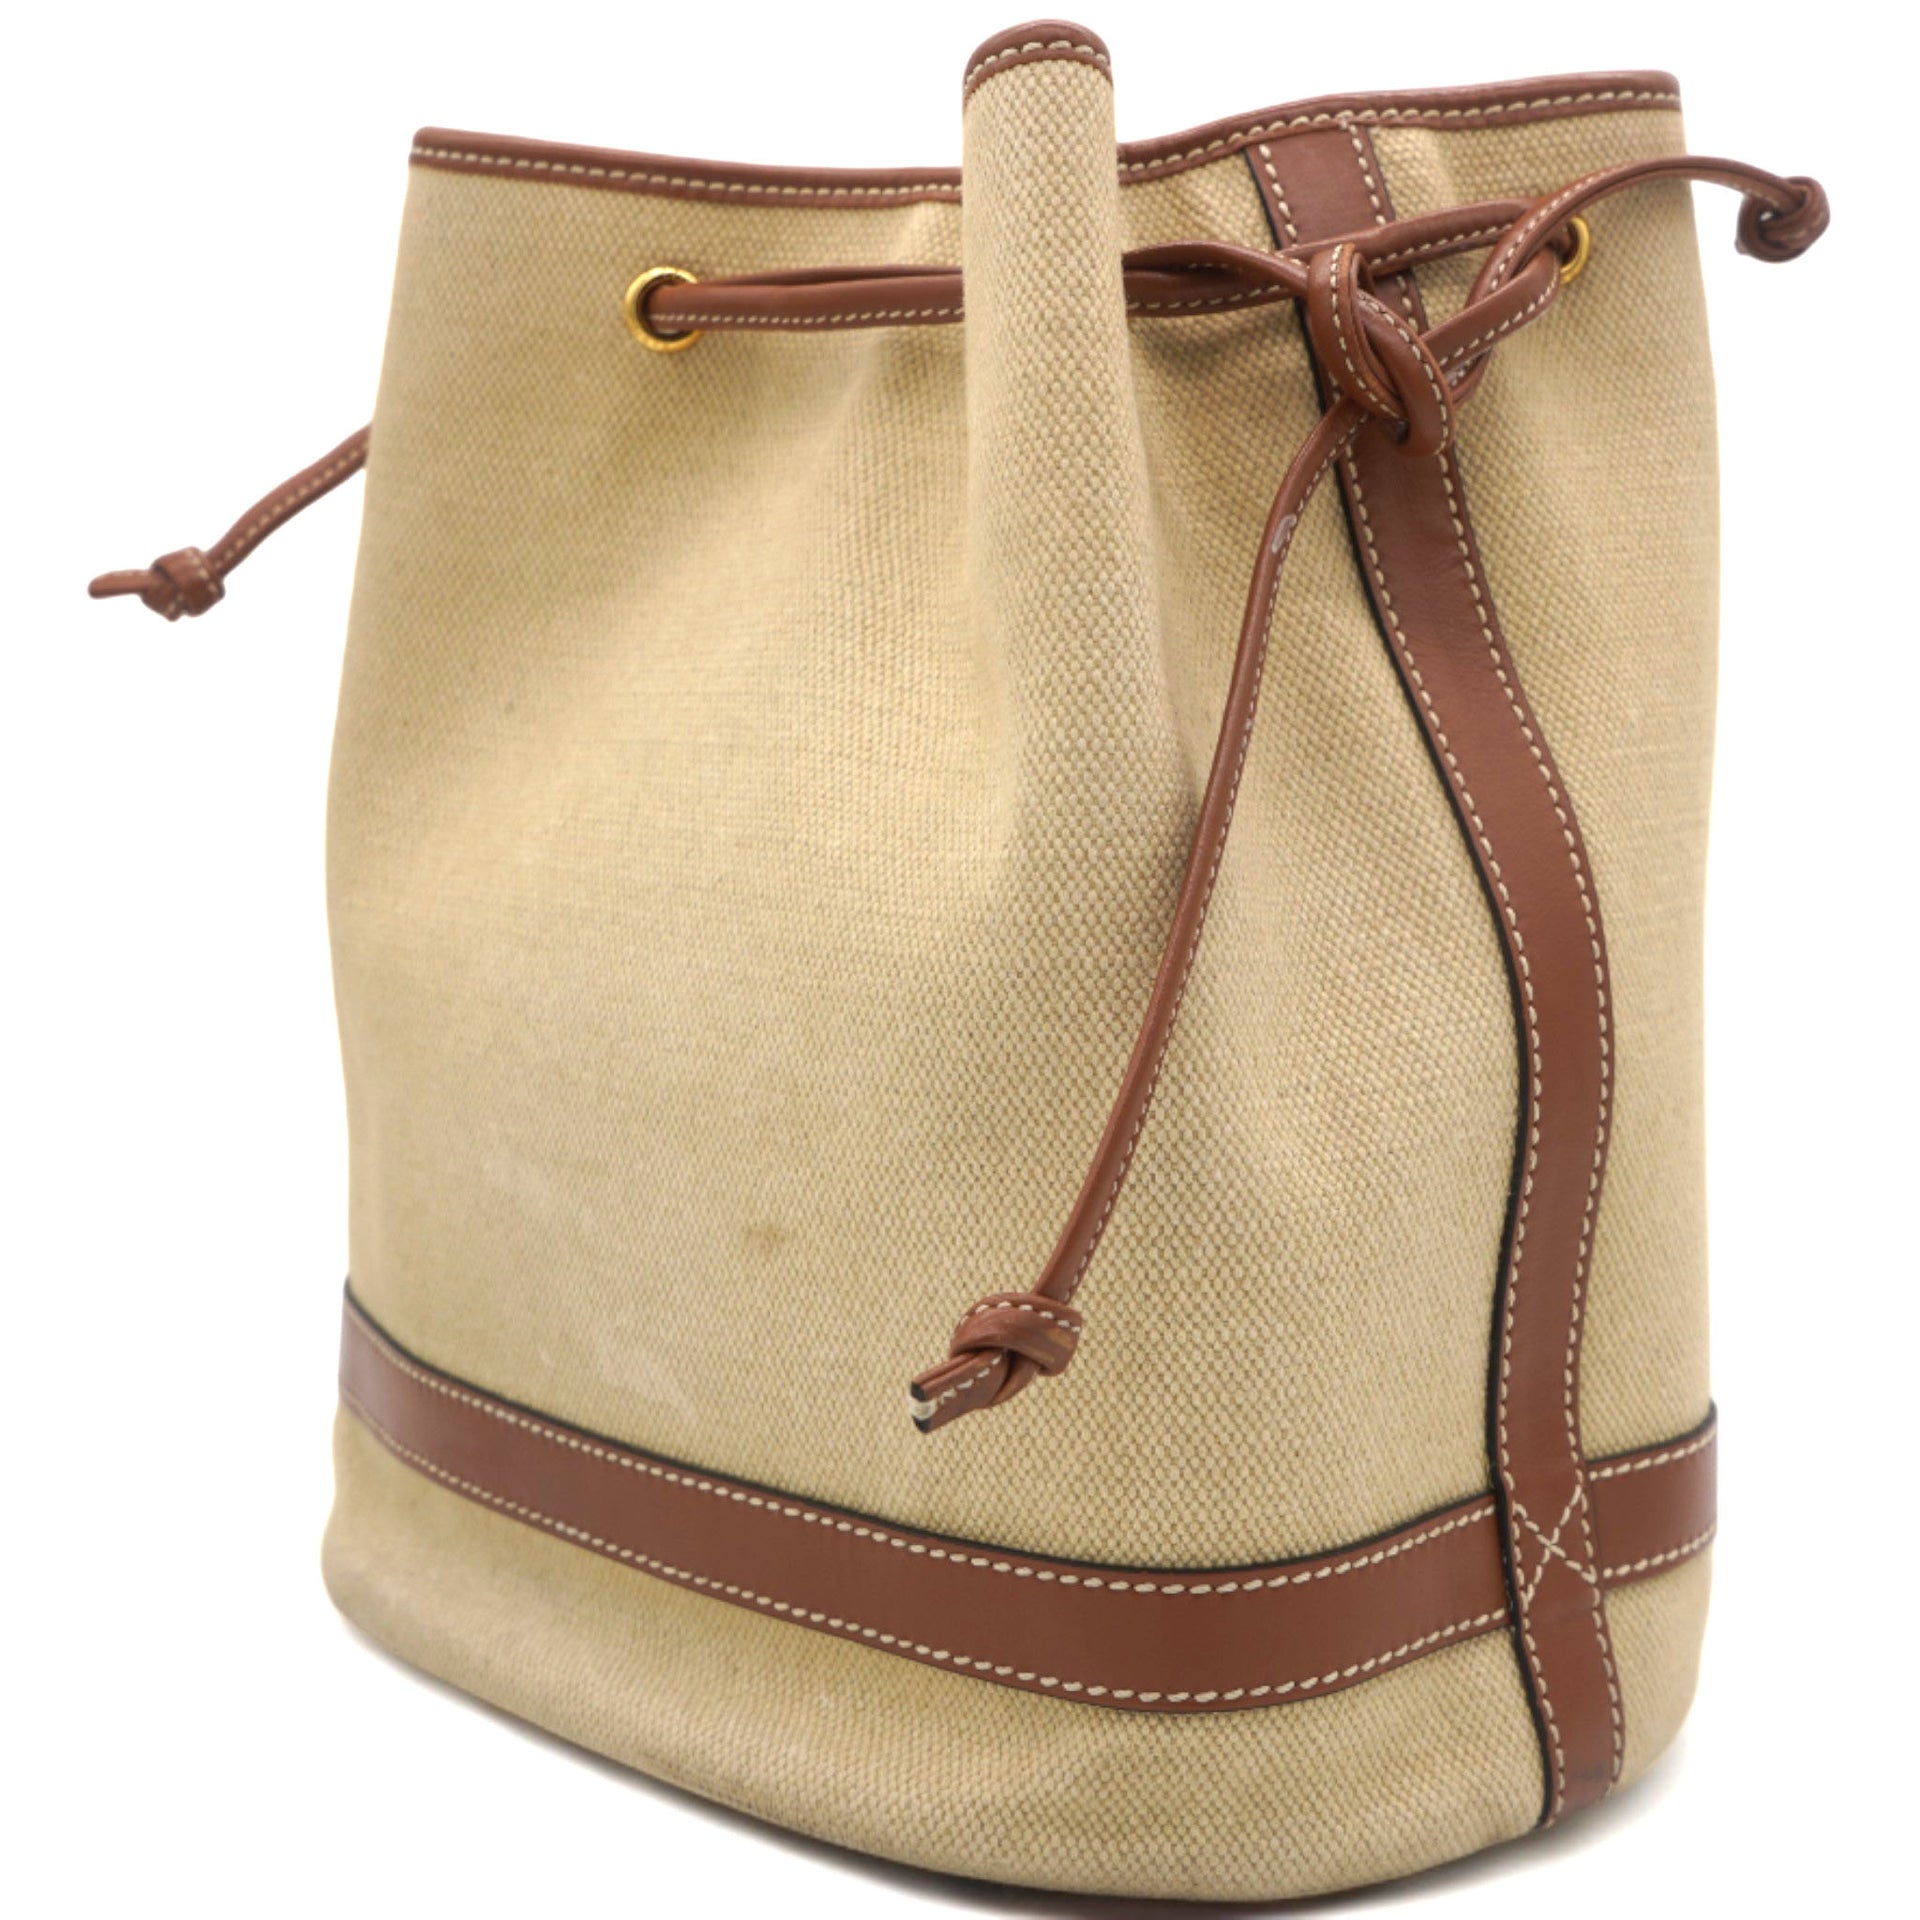 Seau Marin Drawstring Cabas in Beige Textile and Tan Leather